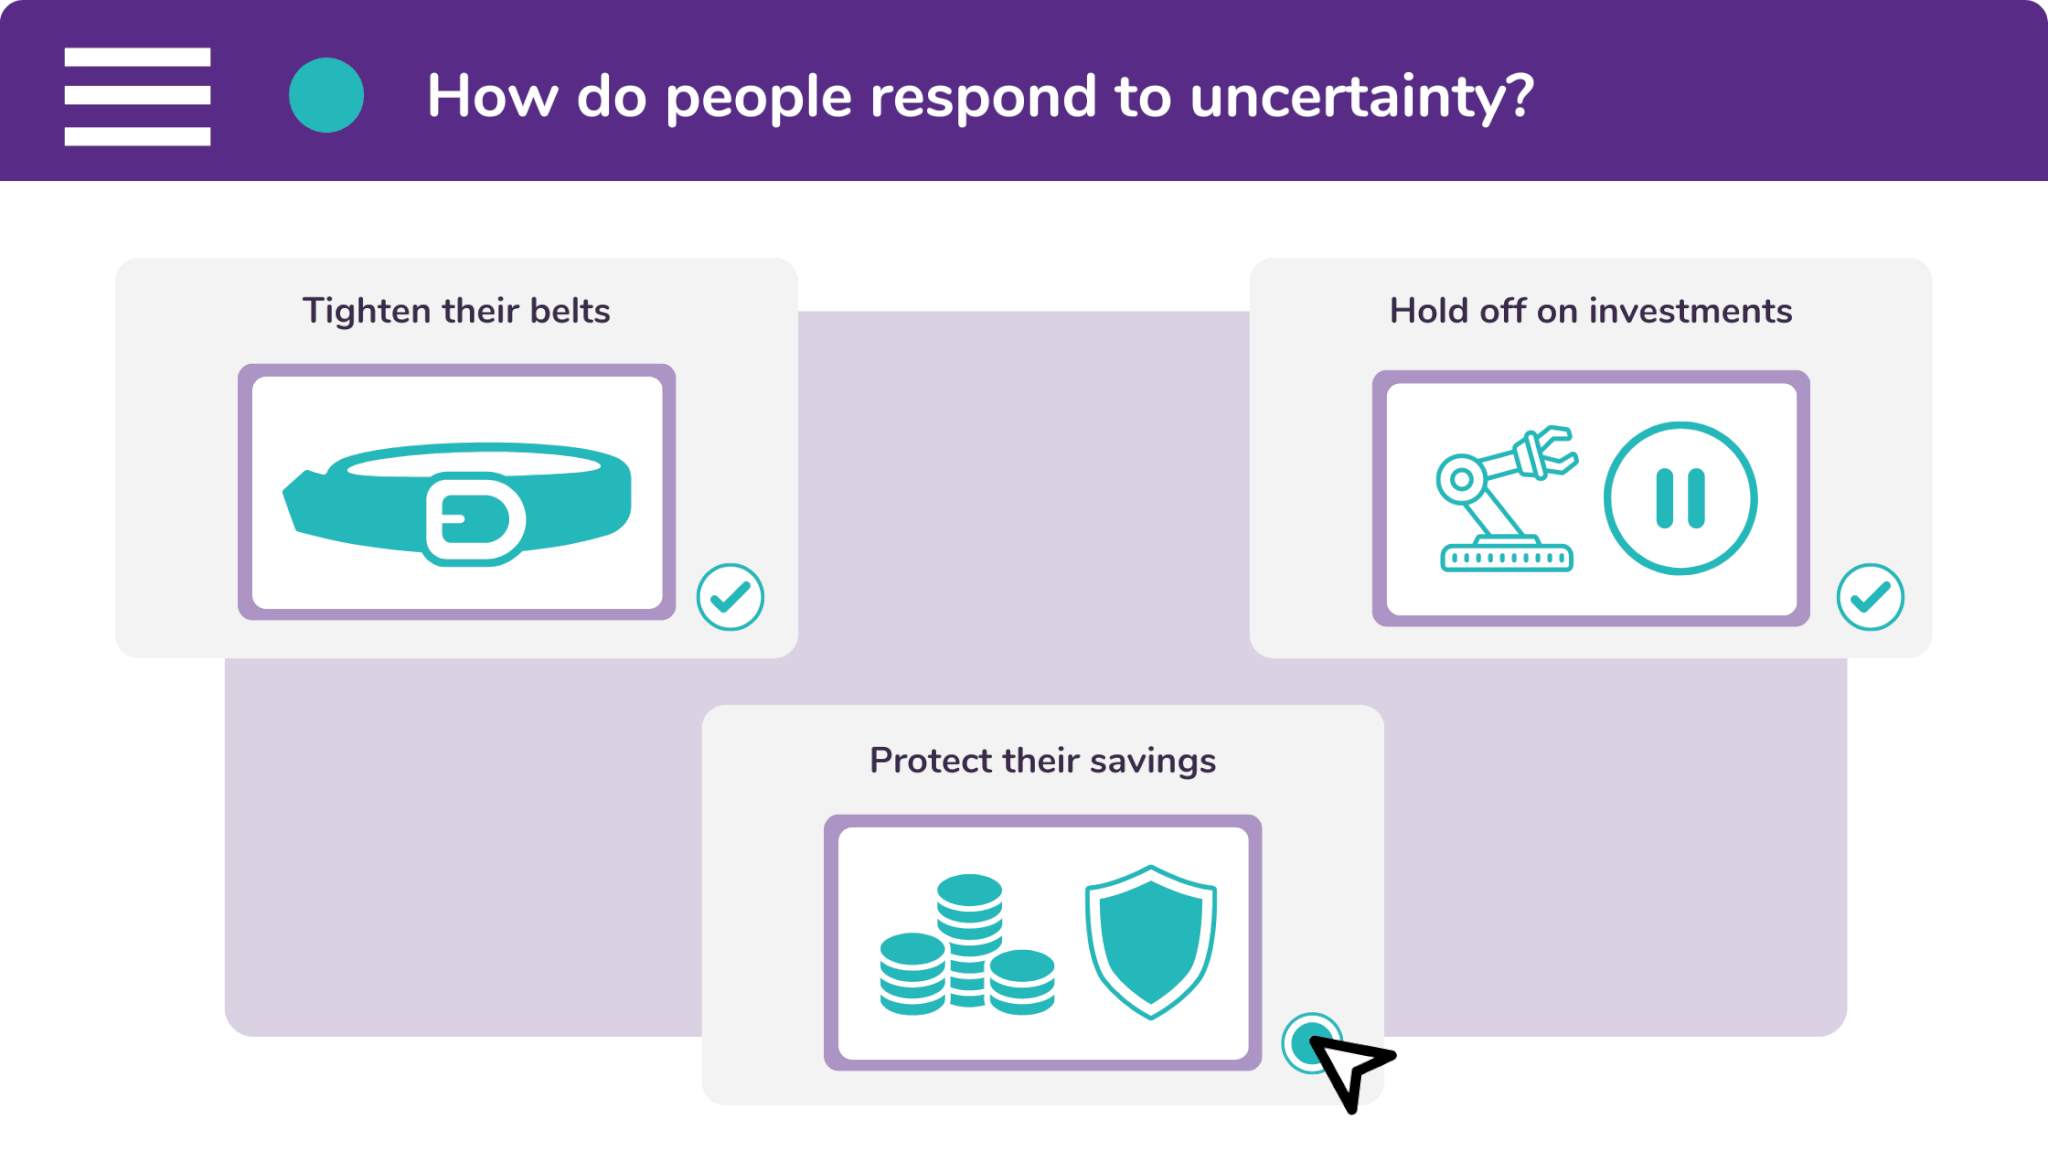 People respond to uncertainty in three ways: they tighten their belts, they pause investment, and they protect their savings.